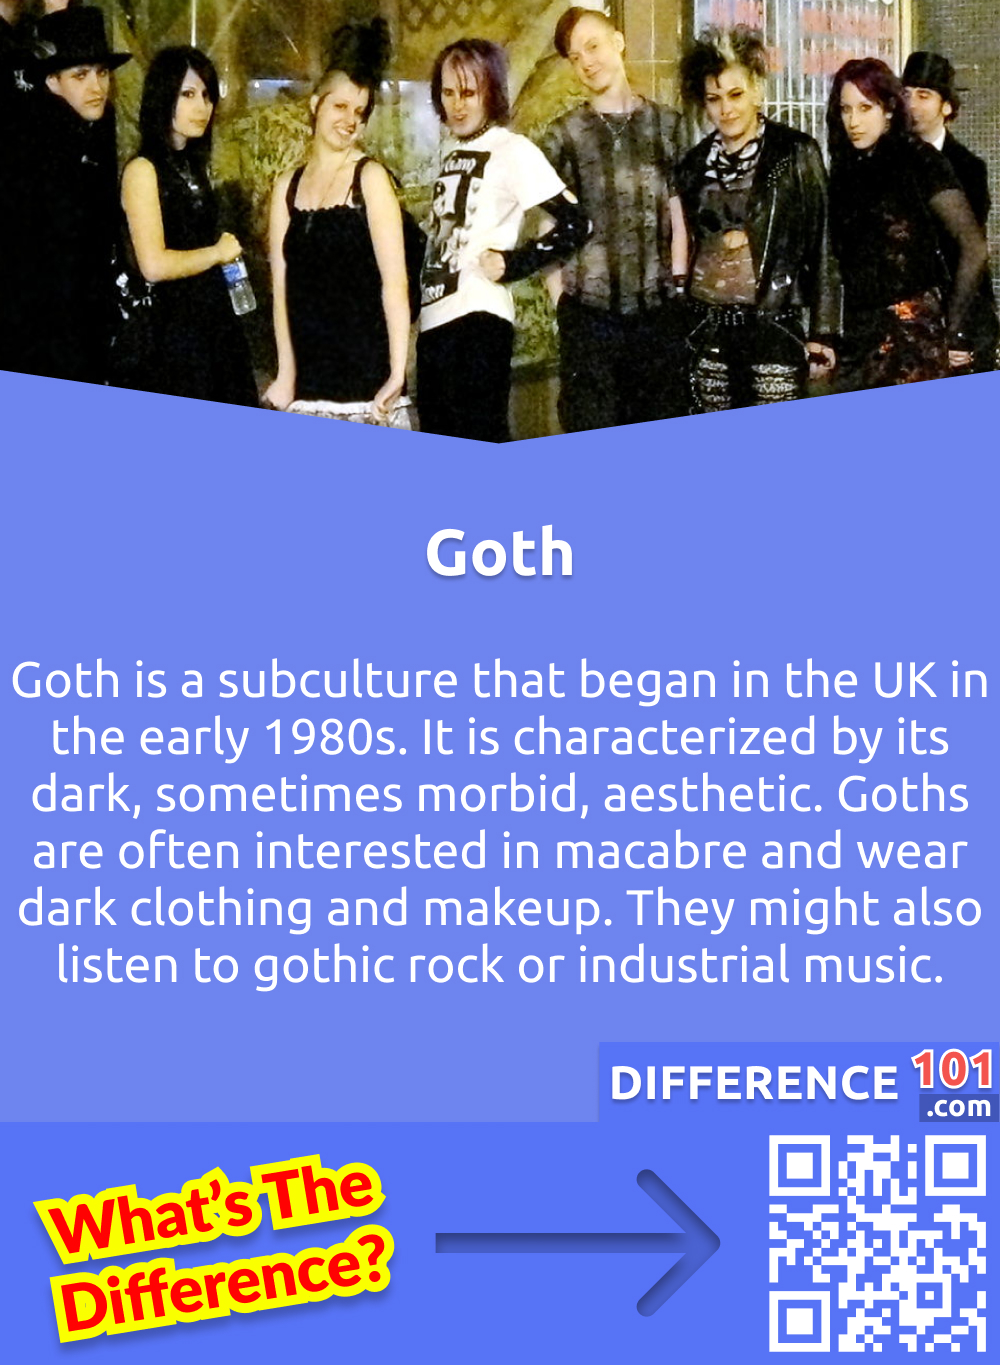 What Is Goth? Goth is a subculture that began in the UK in the early 1980s. It is characterized by its dark, sometimes morbid, aesthetic. Goths are often interested in macabre and wear dark clothing and makeup. They might also listen to gothic rock or industrial music.
